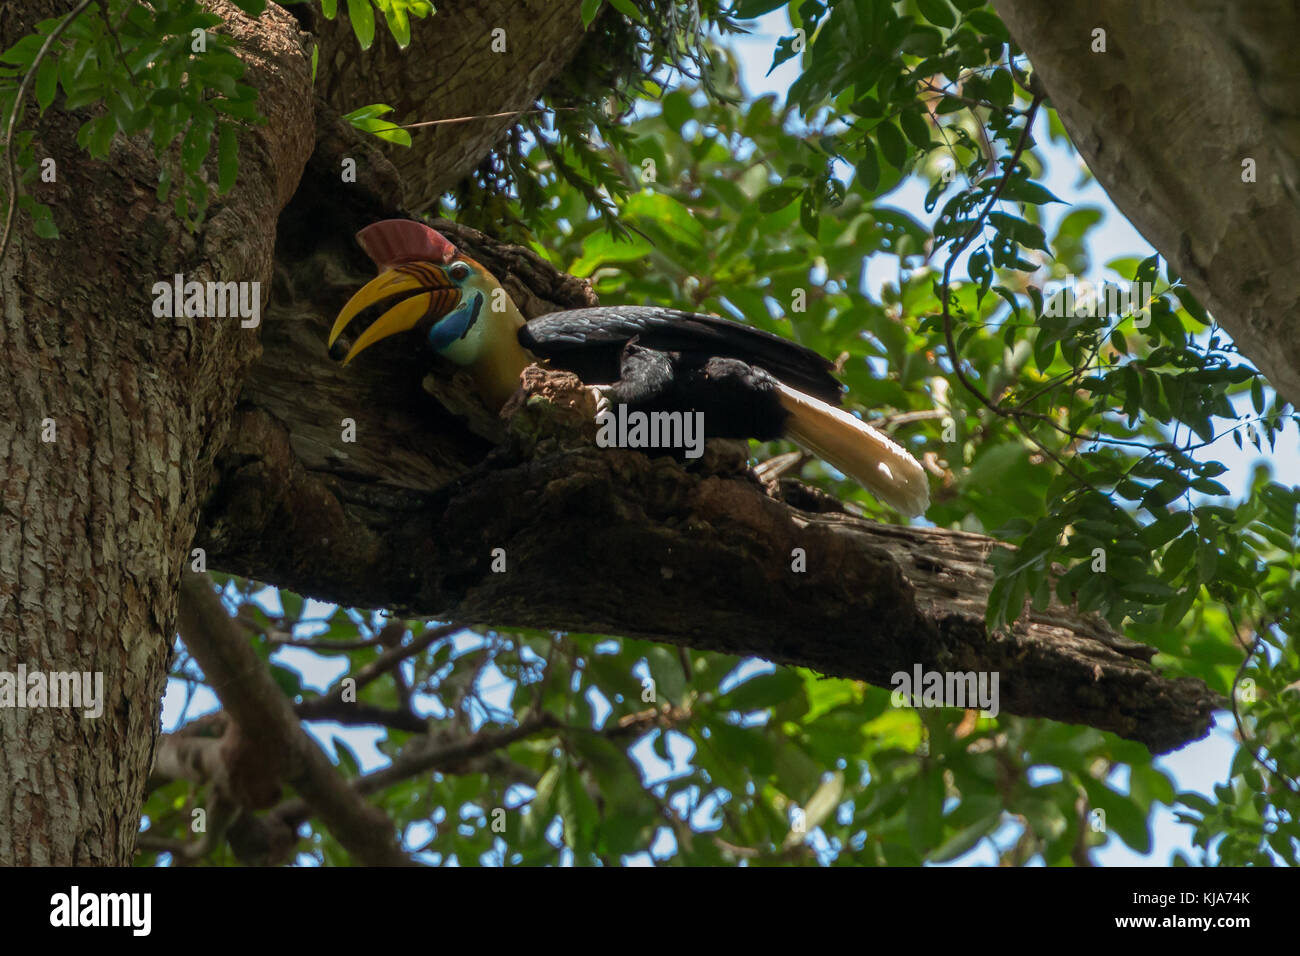 Male Knobbed hornbill (Rhyticeros cassidix) feeding its young in a tree in Tangkoko National Park, North Sulawesi, Indonesia. Stock Photo